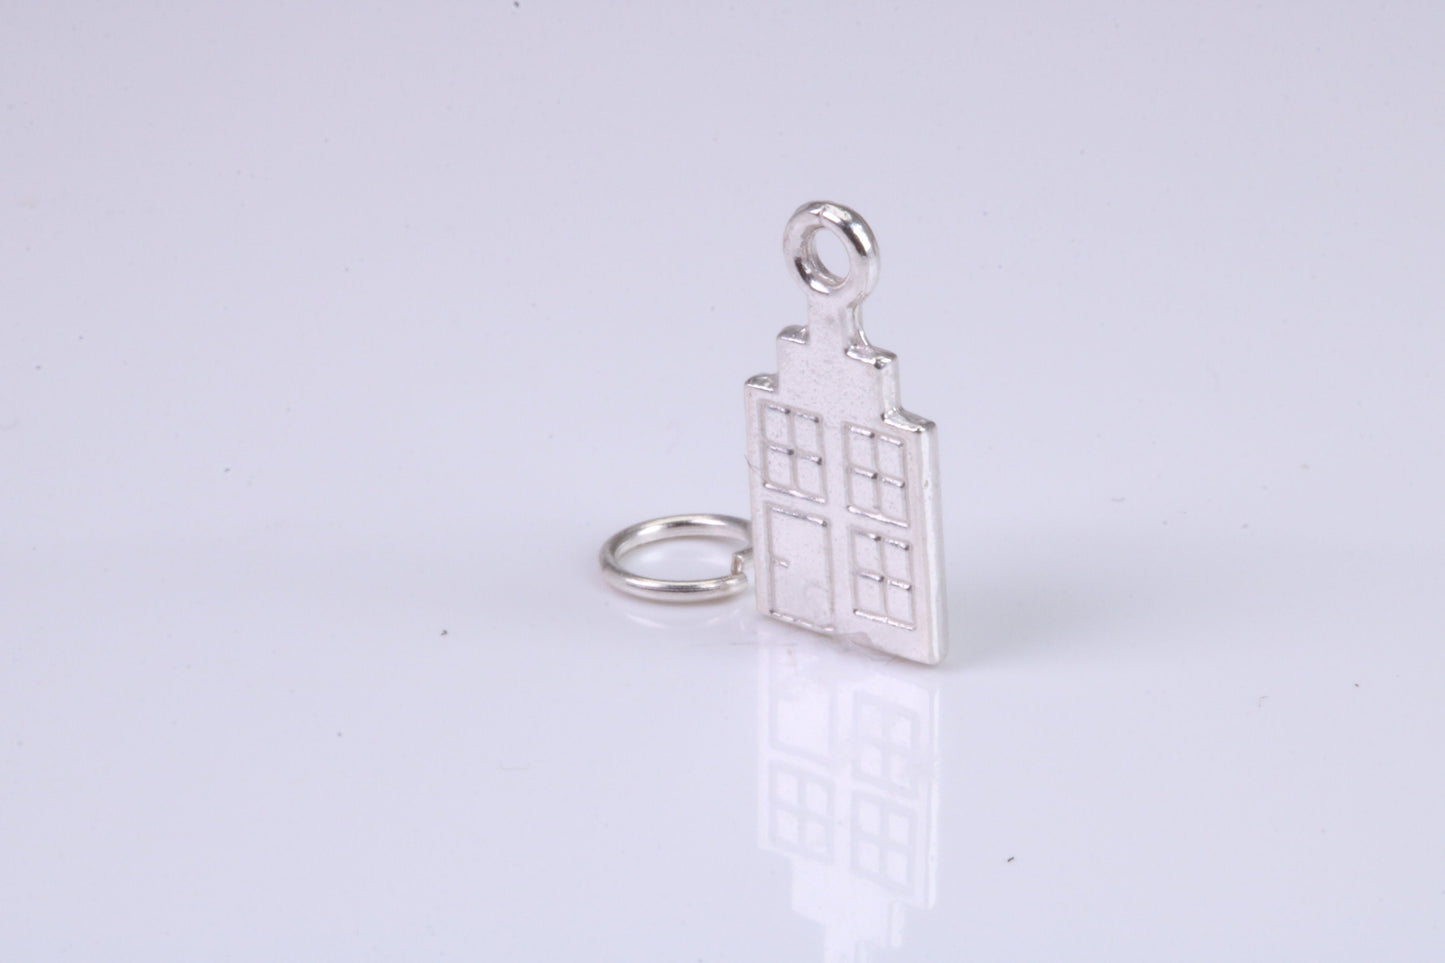 Office Building Charm, Traditional Charm, Made from Solid 925 Grade Sterling Silver, Complete with Attachment Link